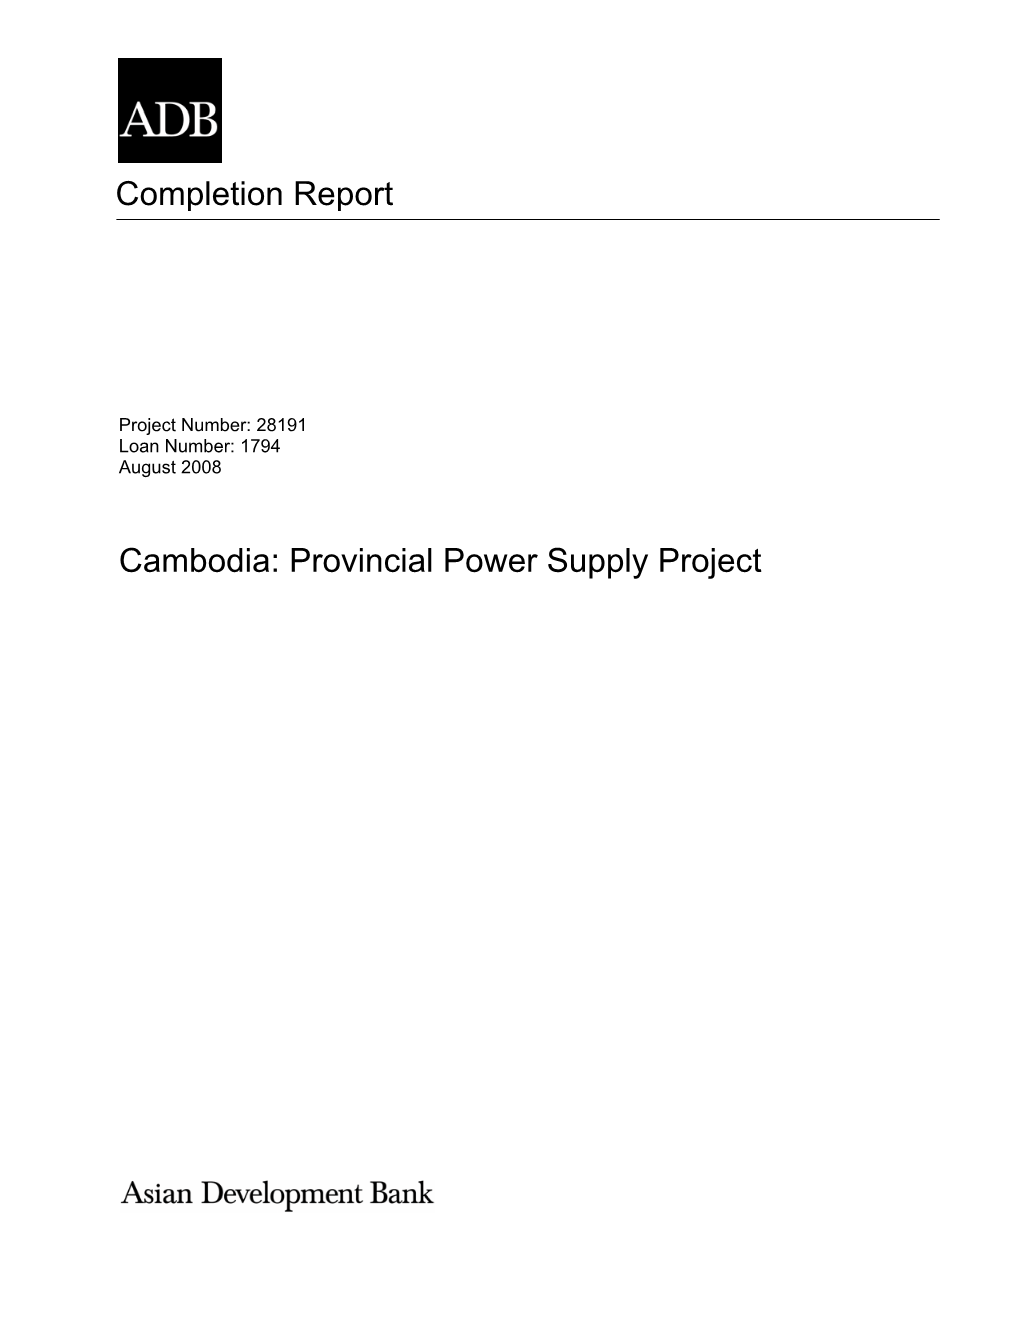 Provincial Power Supply Project